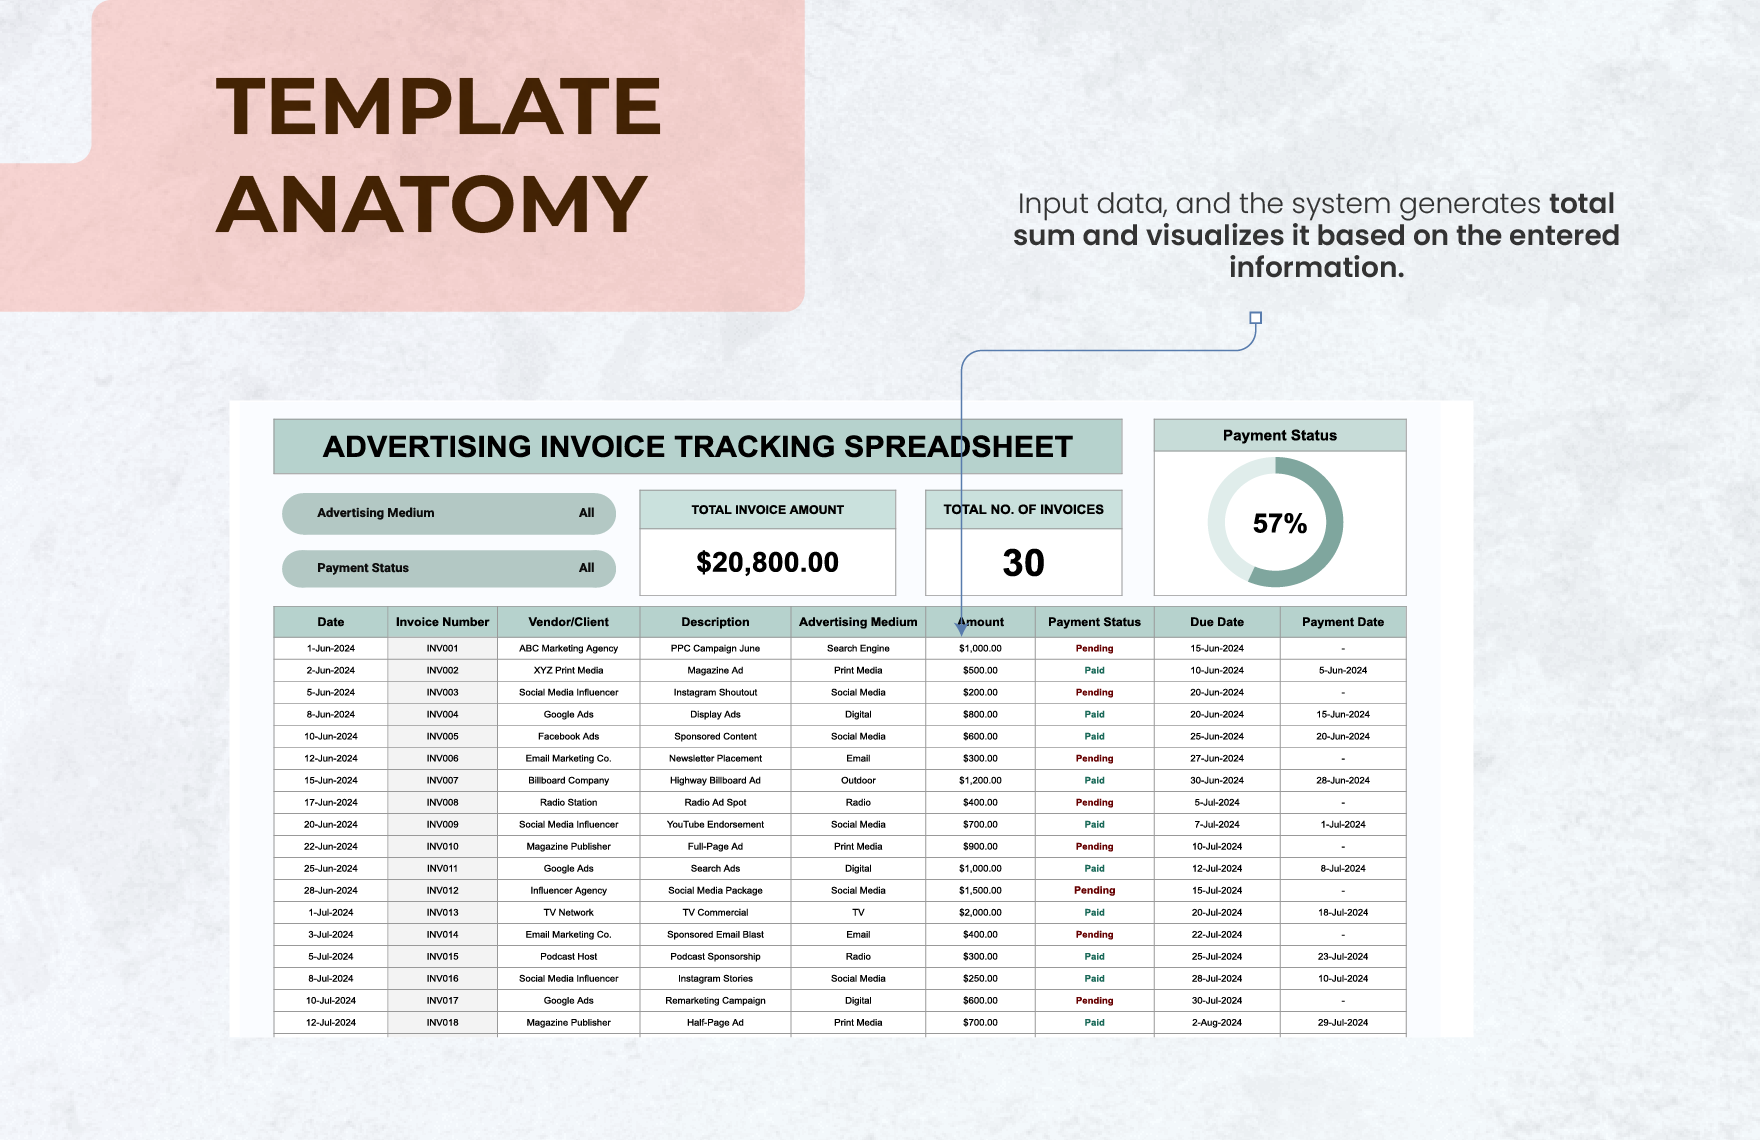 Advertising Invoice Tracking Spreadsheet Template